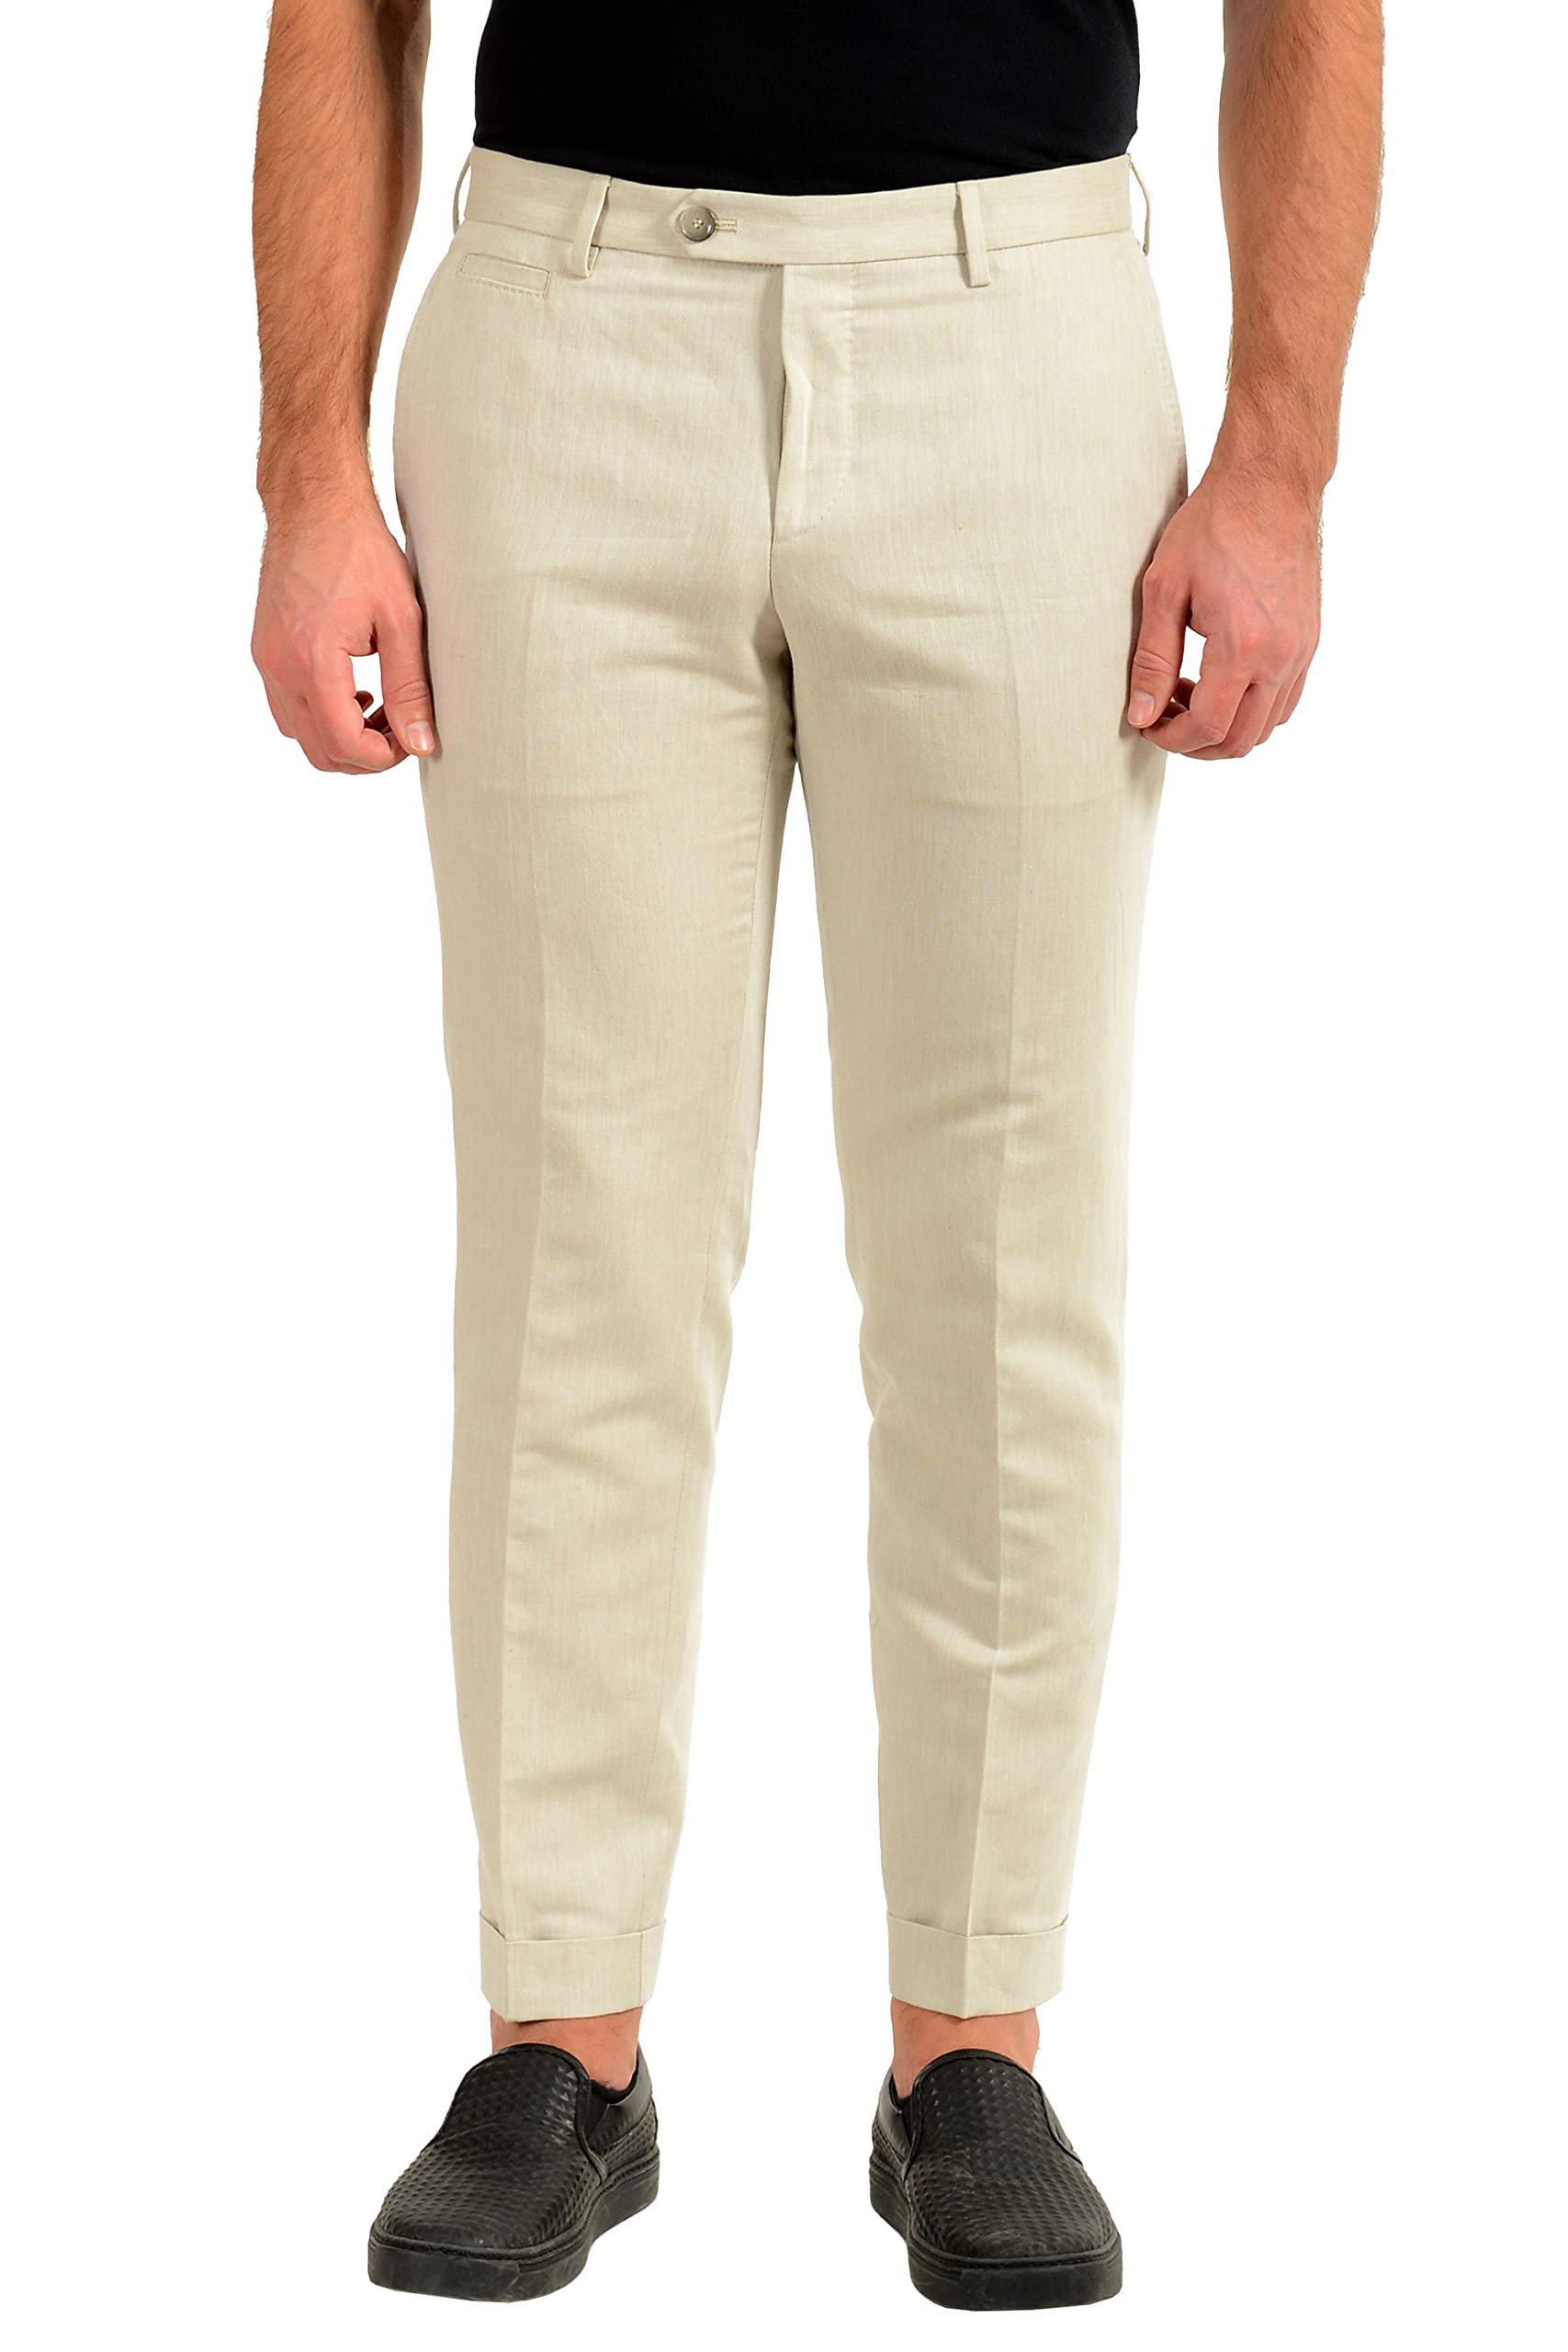 Pure linen dart pants with drawstrings - BOSS - Etienne